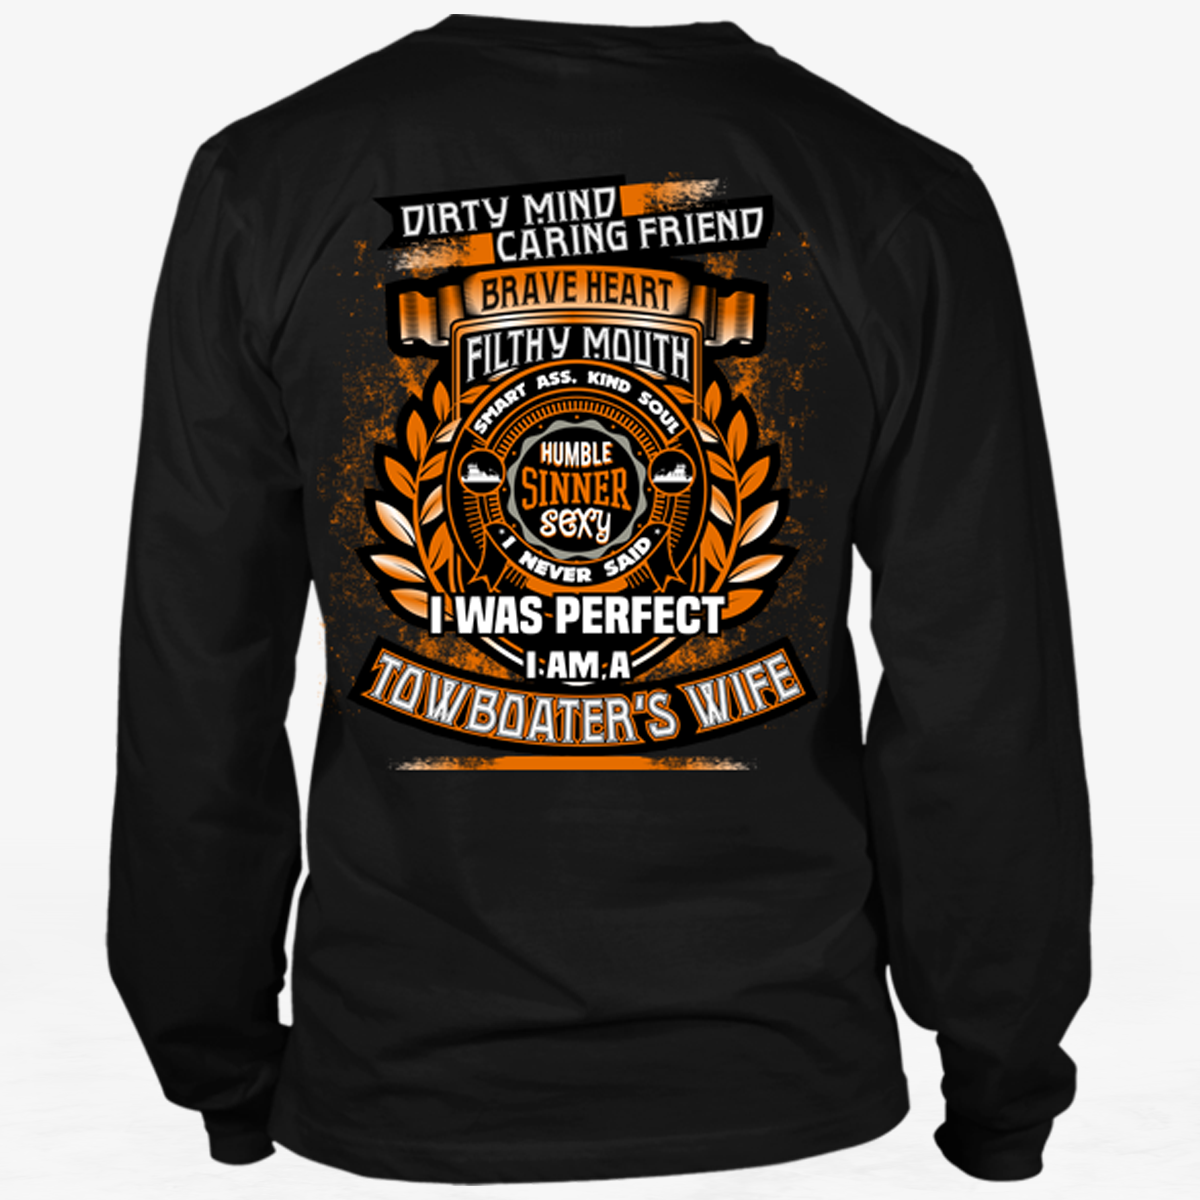 Dirty Mind! Caring Friend! Towboater Wife T-shirt